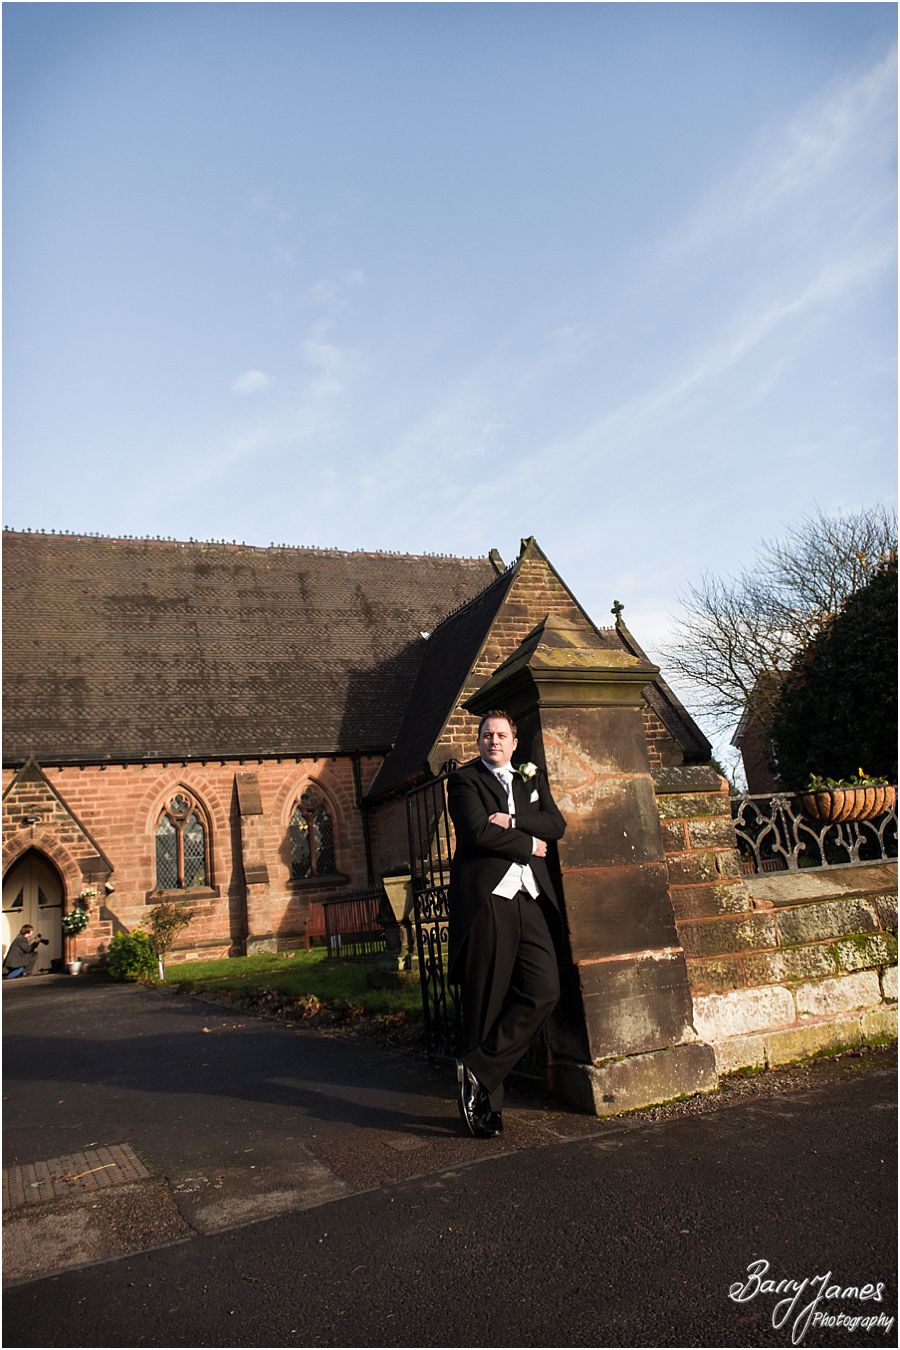 Gorgeous wedding photographs at St Pauls Church in Coven by Brewood Wedding Photographer Barry James